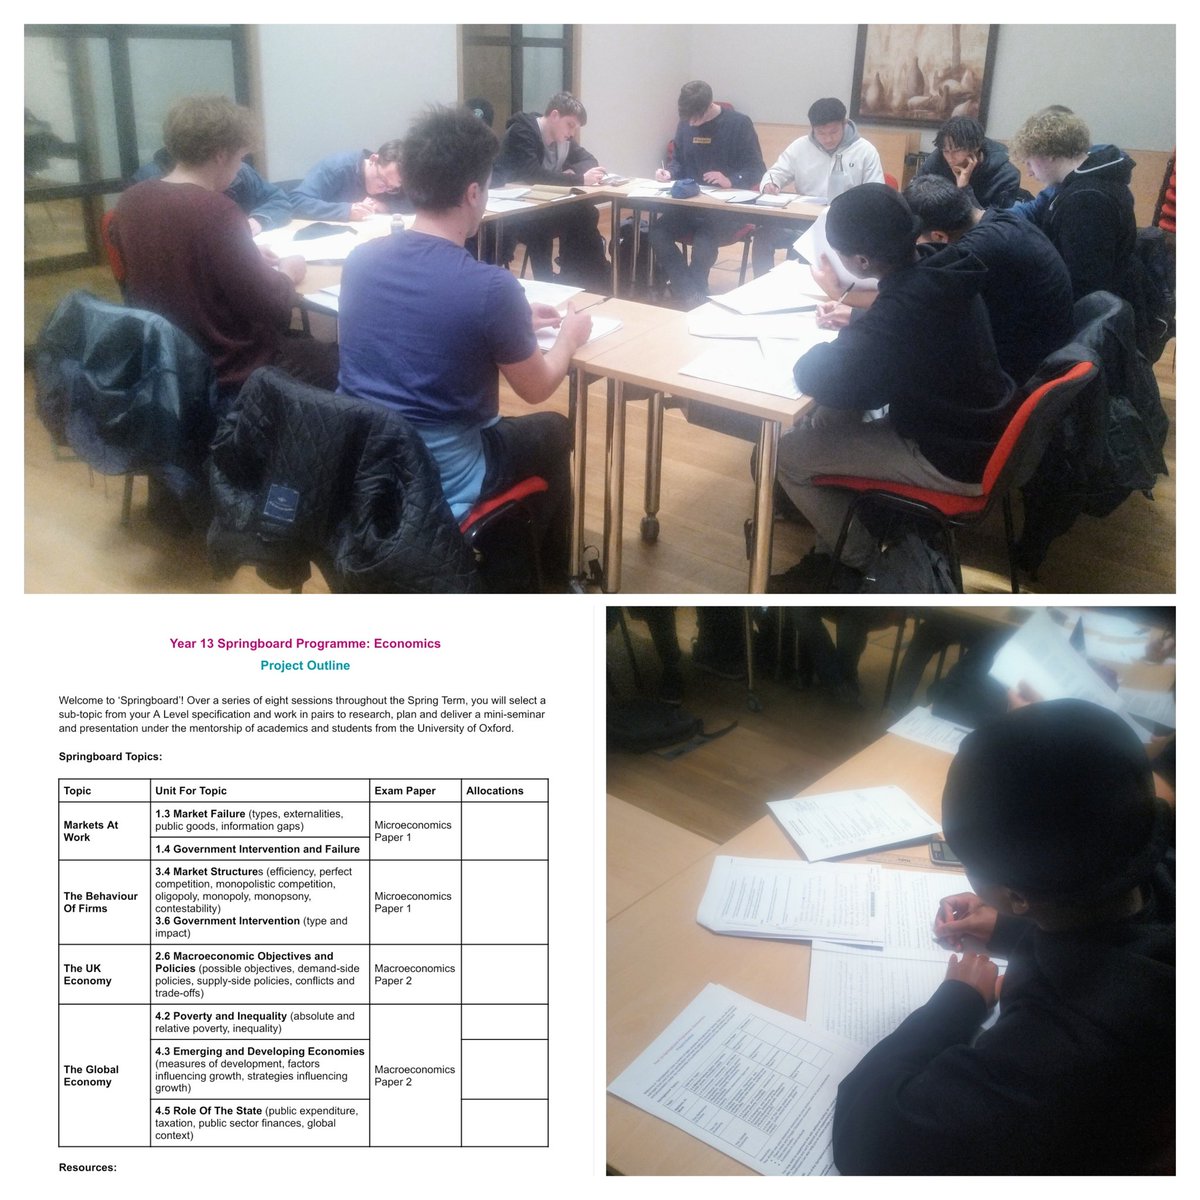 Our Year 13 Economists are deep into a practice paper as part of their Springboard extension programme, a Spring Term series of seminars facilitated by former students and designed to help them think independently, critically and apply their knowledge in new contexts.